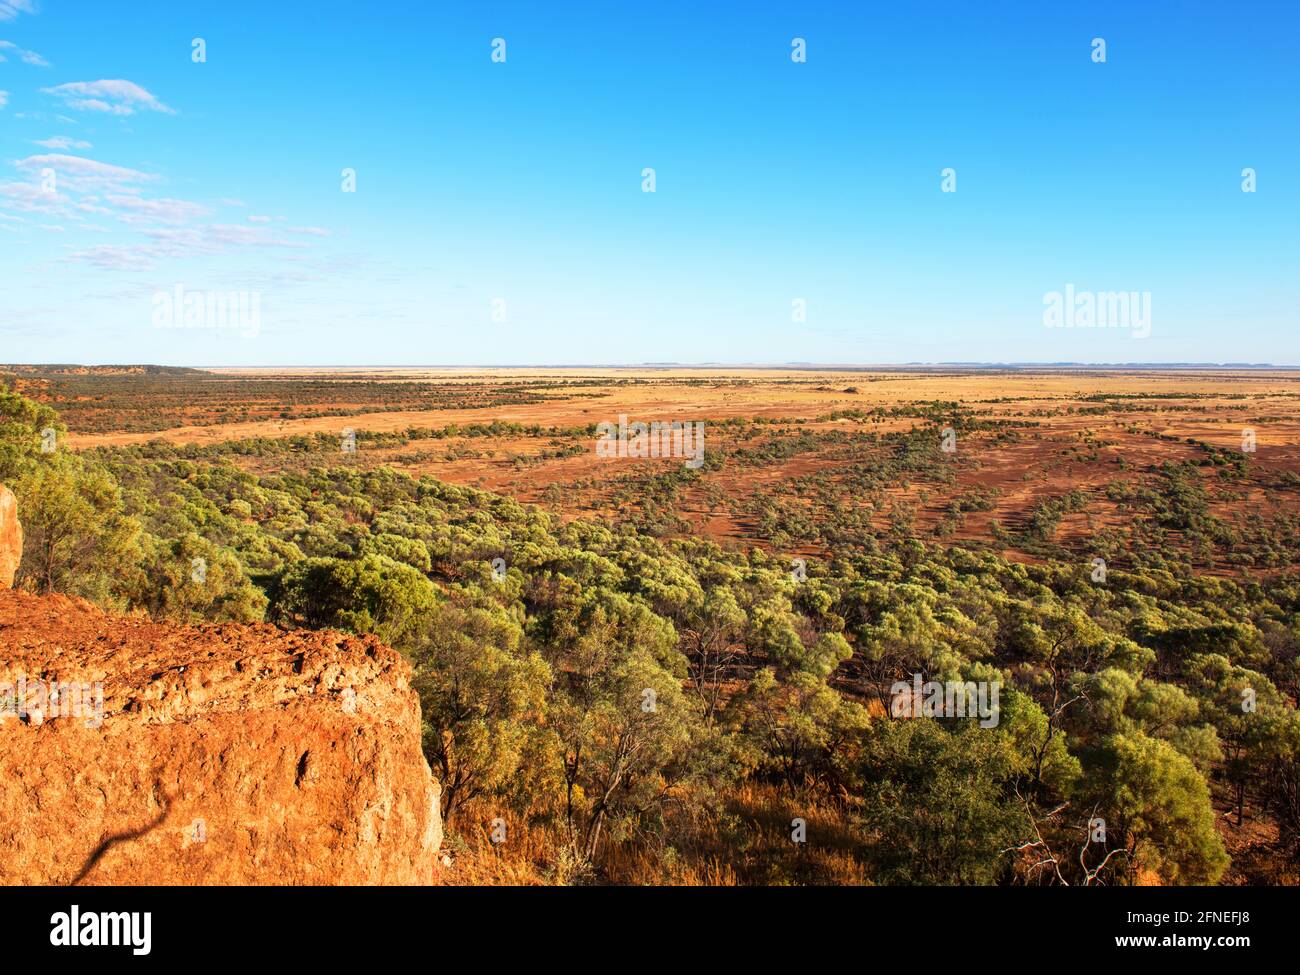 Scenery surrounding the remote town of Winton, in western Queensland, Australia. Stock Photo